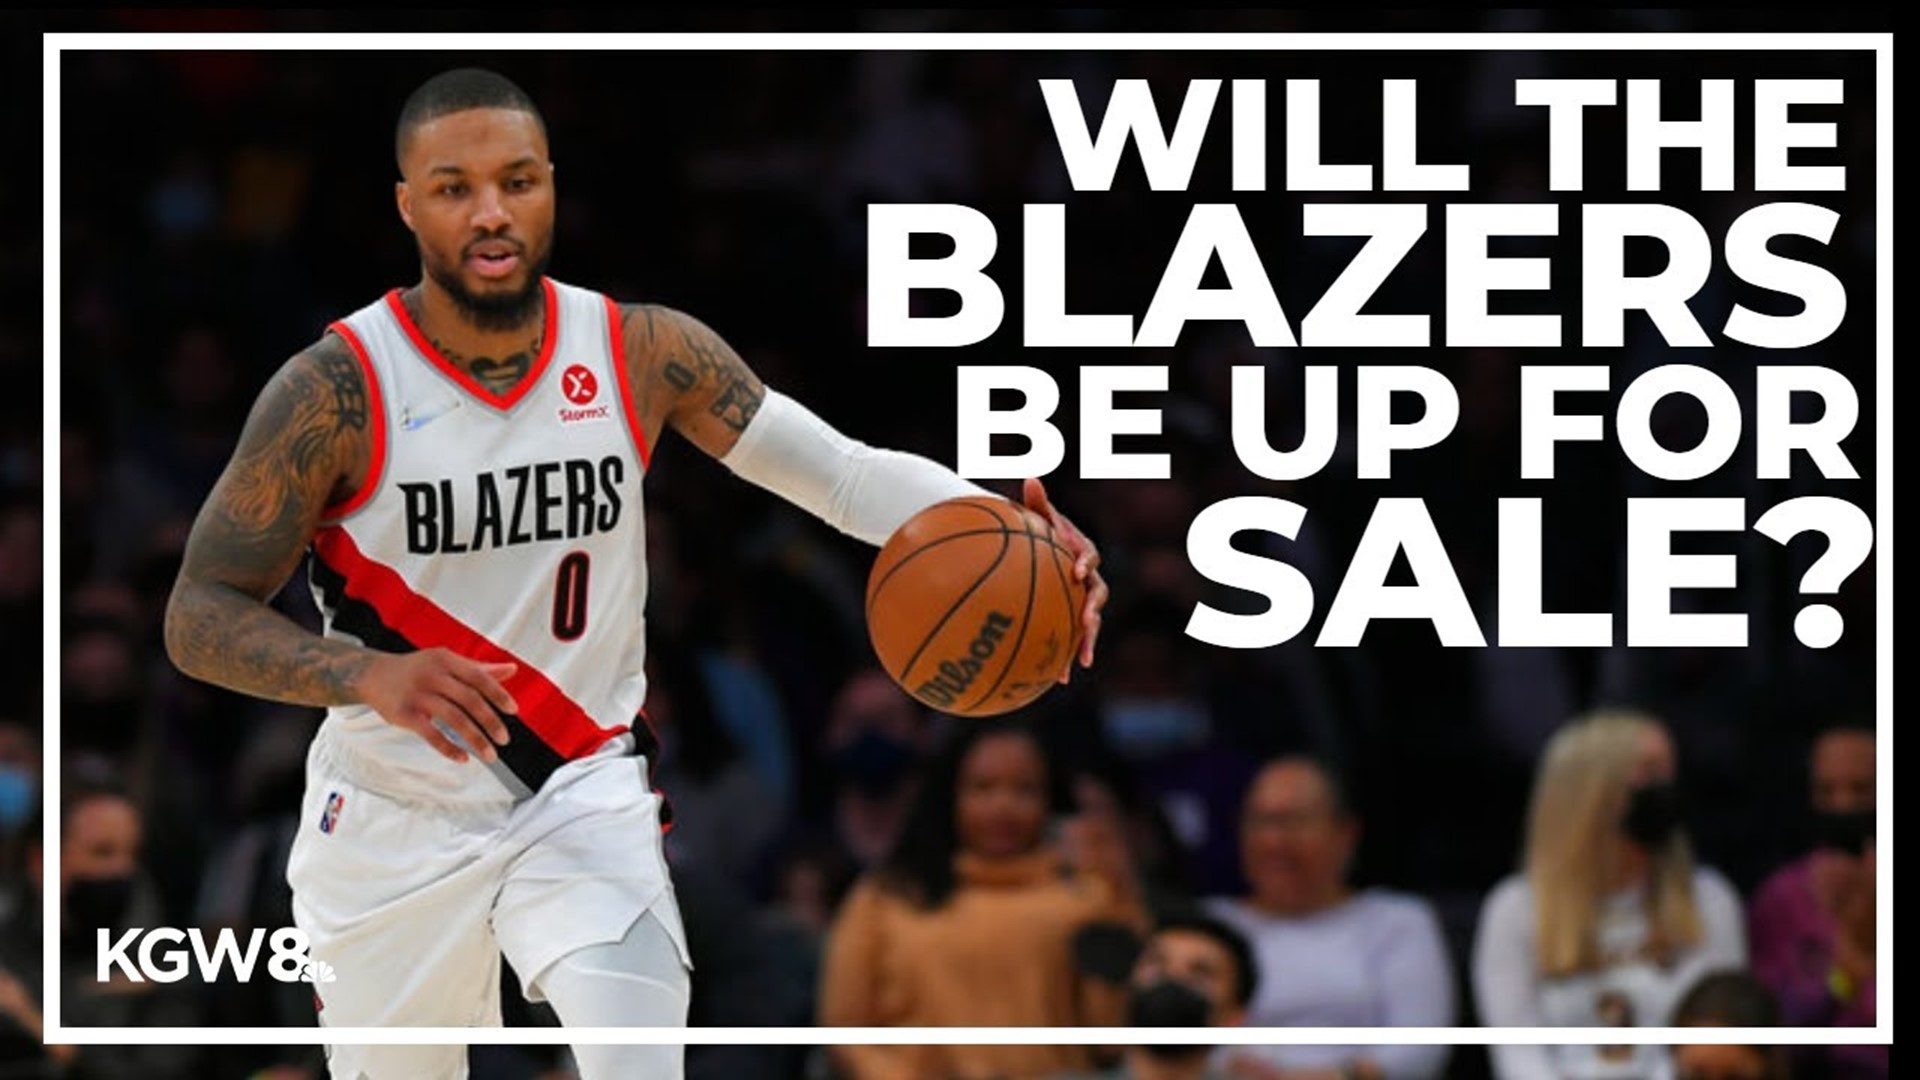 Sports writer John Canzano published an article saying the Blazers will go up for auction. He and KGW's Orlando Sanchez talked about how much the team could go for.